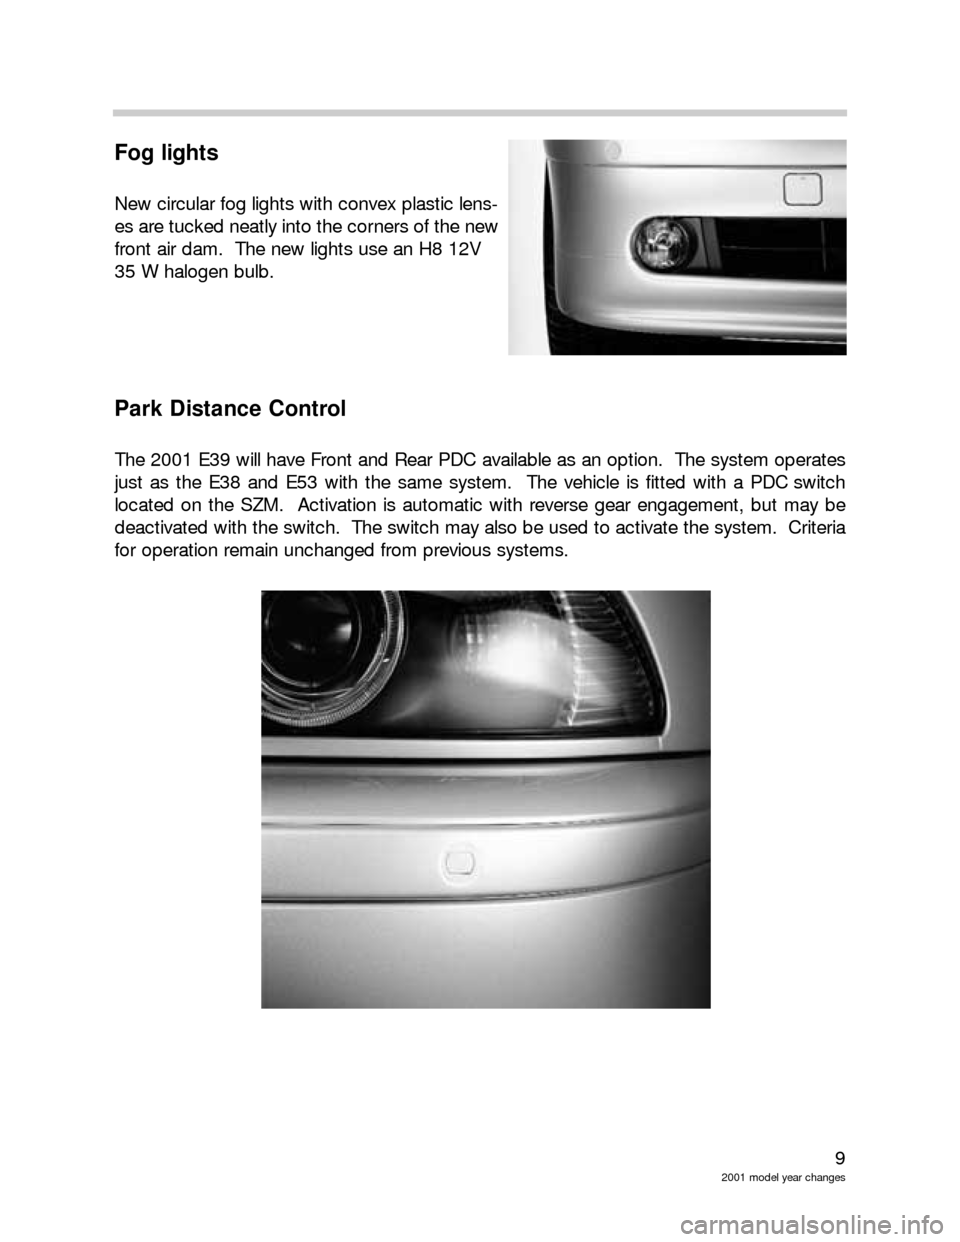 BMW 3 SERIES 2003 E46 Model Yar Changes 9
2001 model year changes
Fog lights
New circular fog lights with convex plastic lens-
es are tucked neatly into the corners of the new
front air dam.  The new lights use an H8 12V 
35 W halogen bulb.